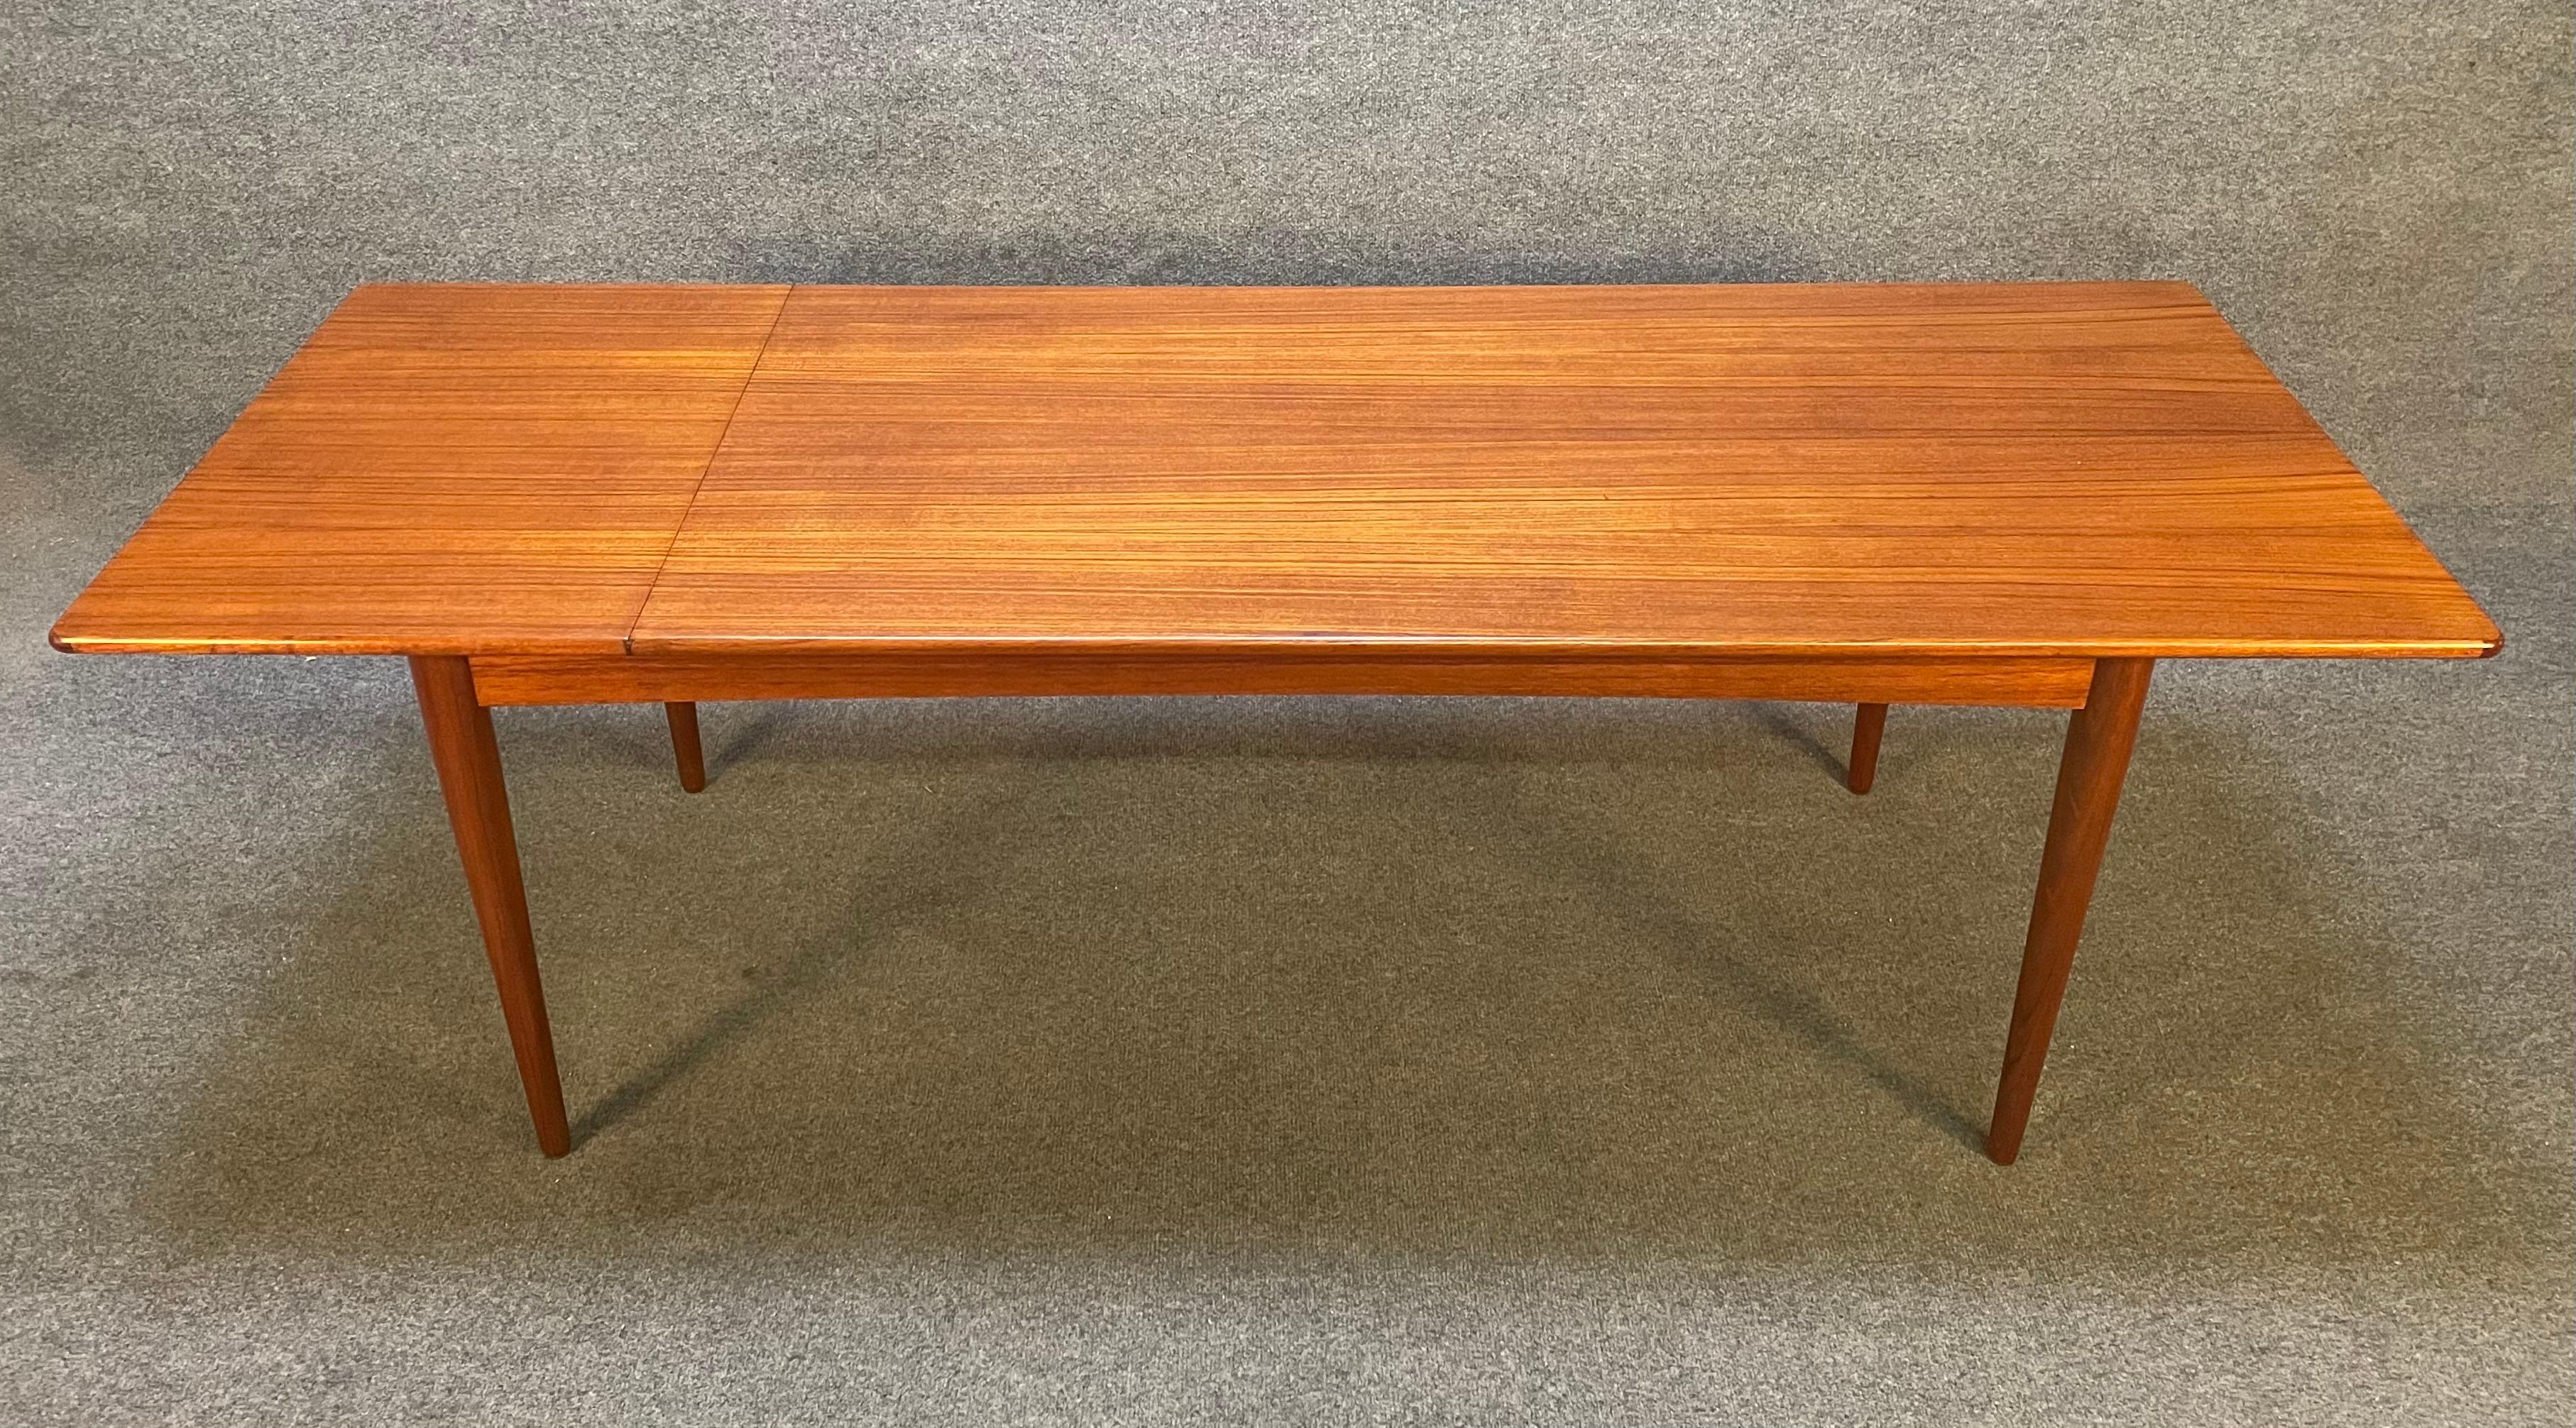 Vintage Danish Mid-Century Modern Teak Drop Leaf Coffee Table In Good Condition For Sale In San Marcos, CA